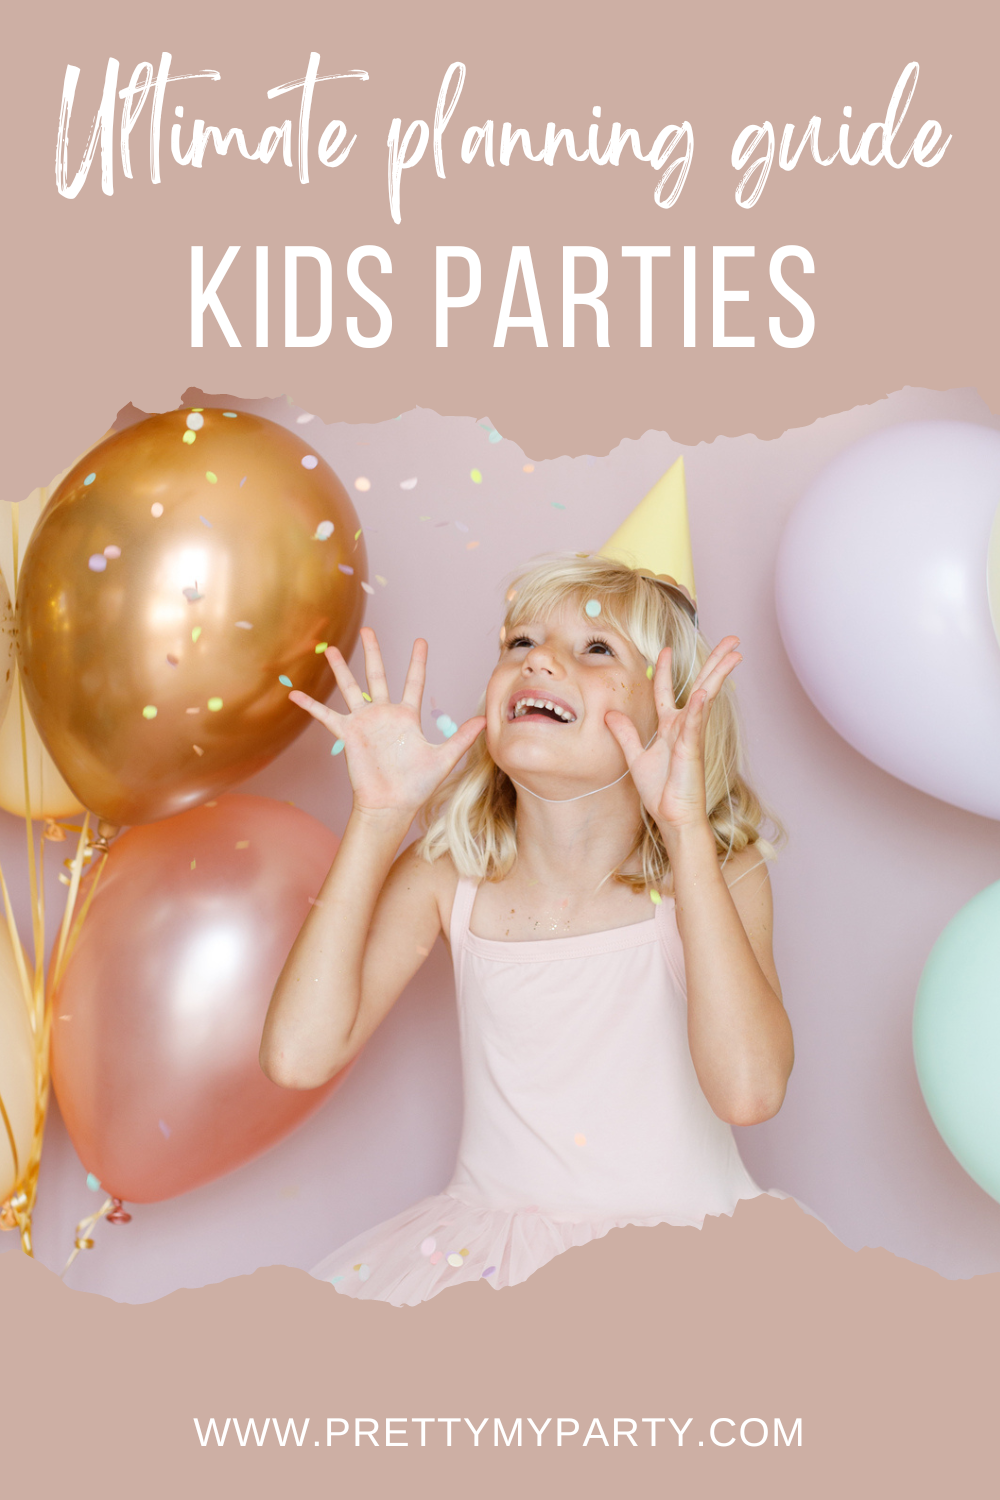 How to plan a kids' birthday party – the ultimate guide